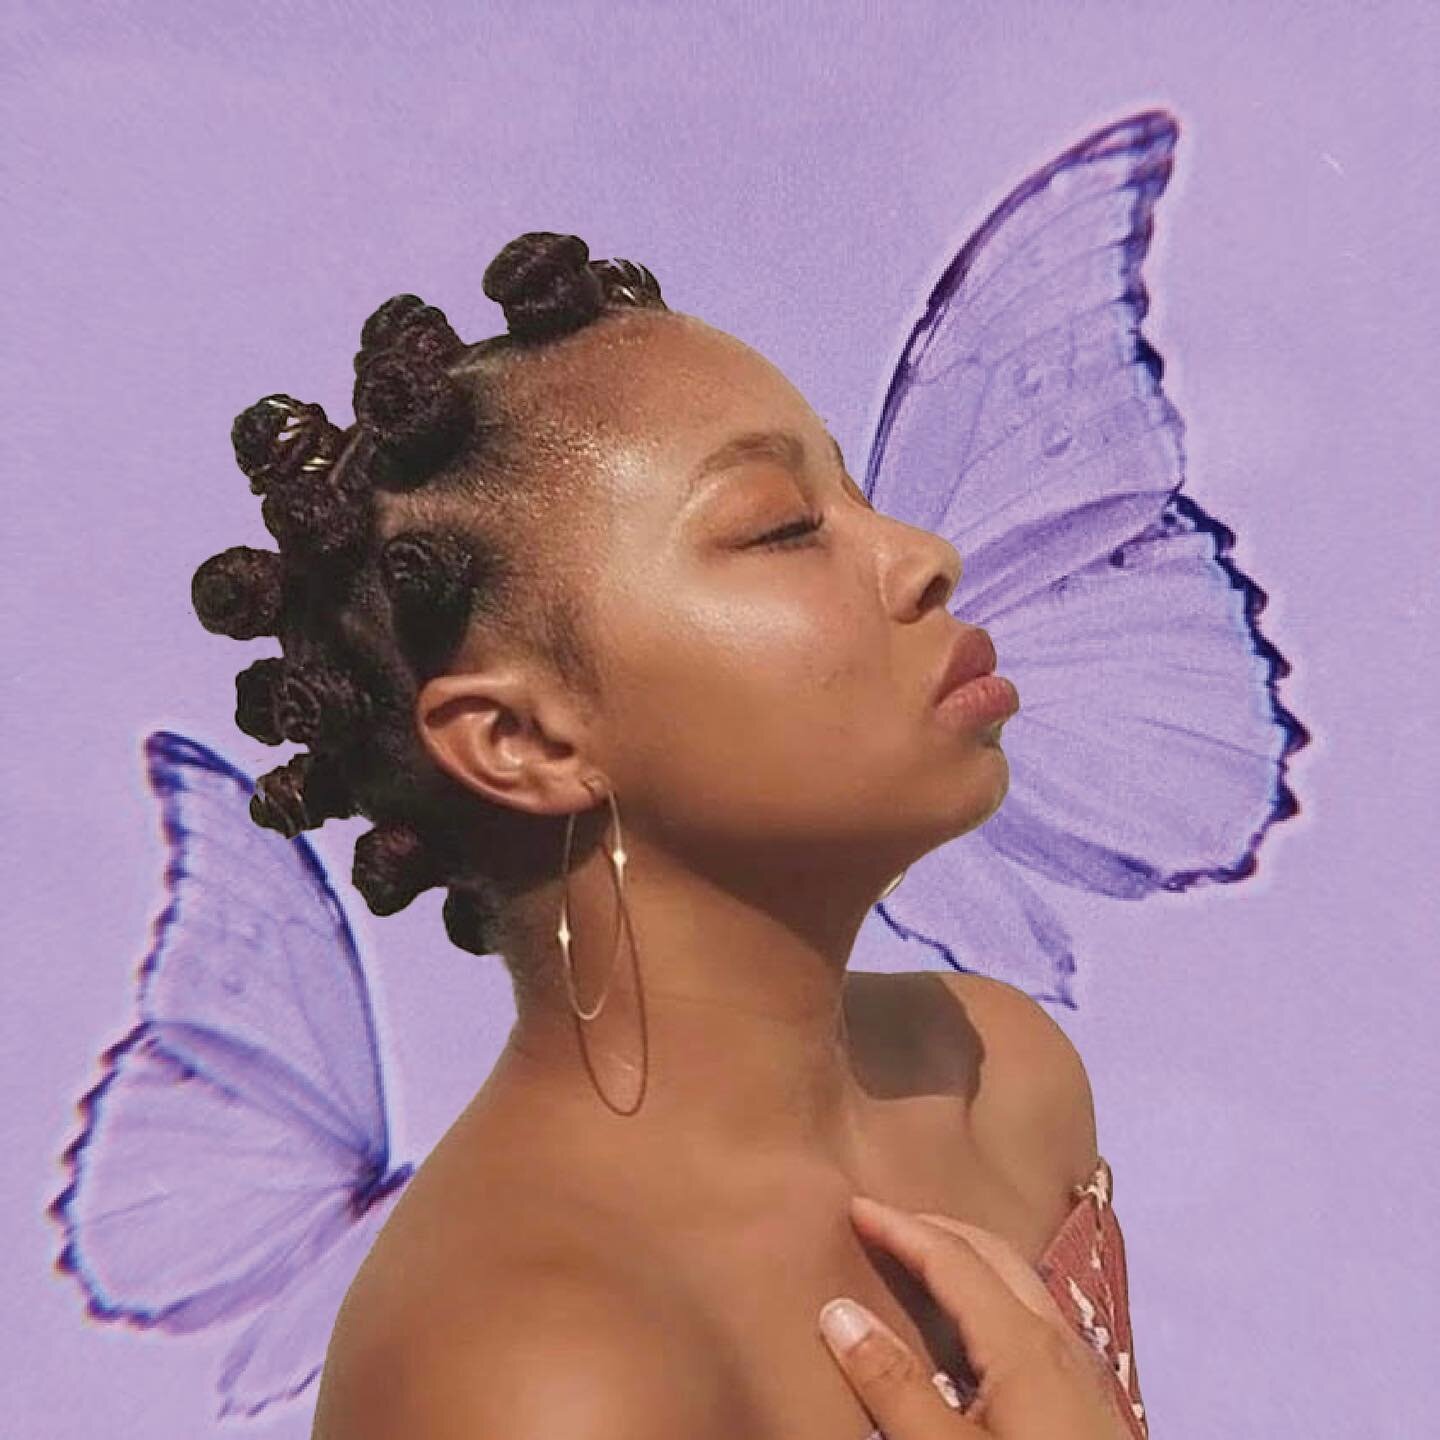 those who make you feel good about the physical you, feed your soul too &lt;3 we love our beauty industry professionals 💜💜💜💜

🎨 @nelleekayehair 

#hairstyles #bantuknots #beautiful #ethereal #aesthetic #ａｅｓｔｈｅｔｉｃ #hairstylist #redken